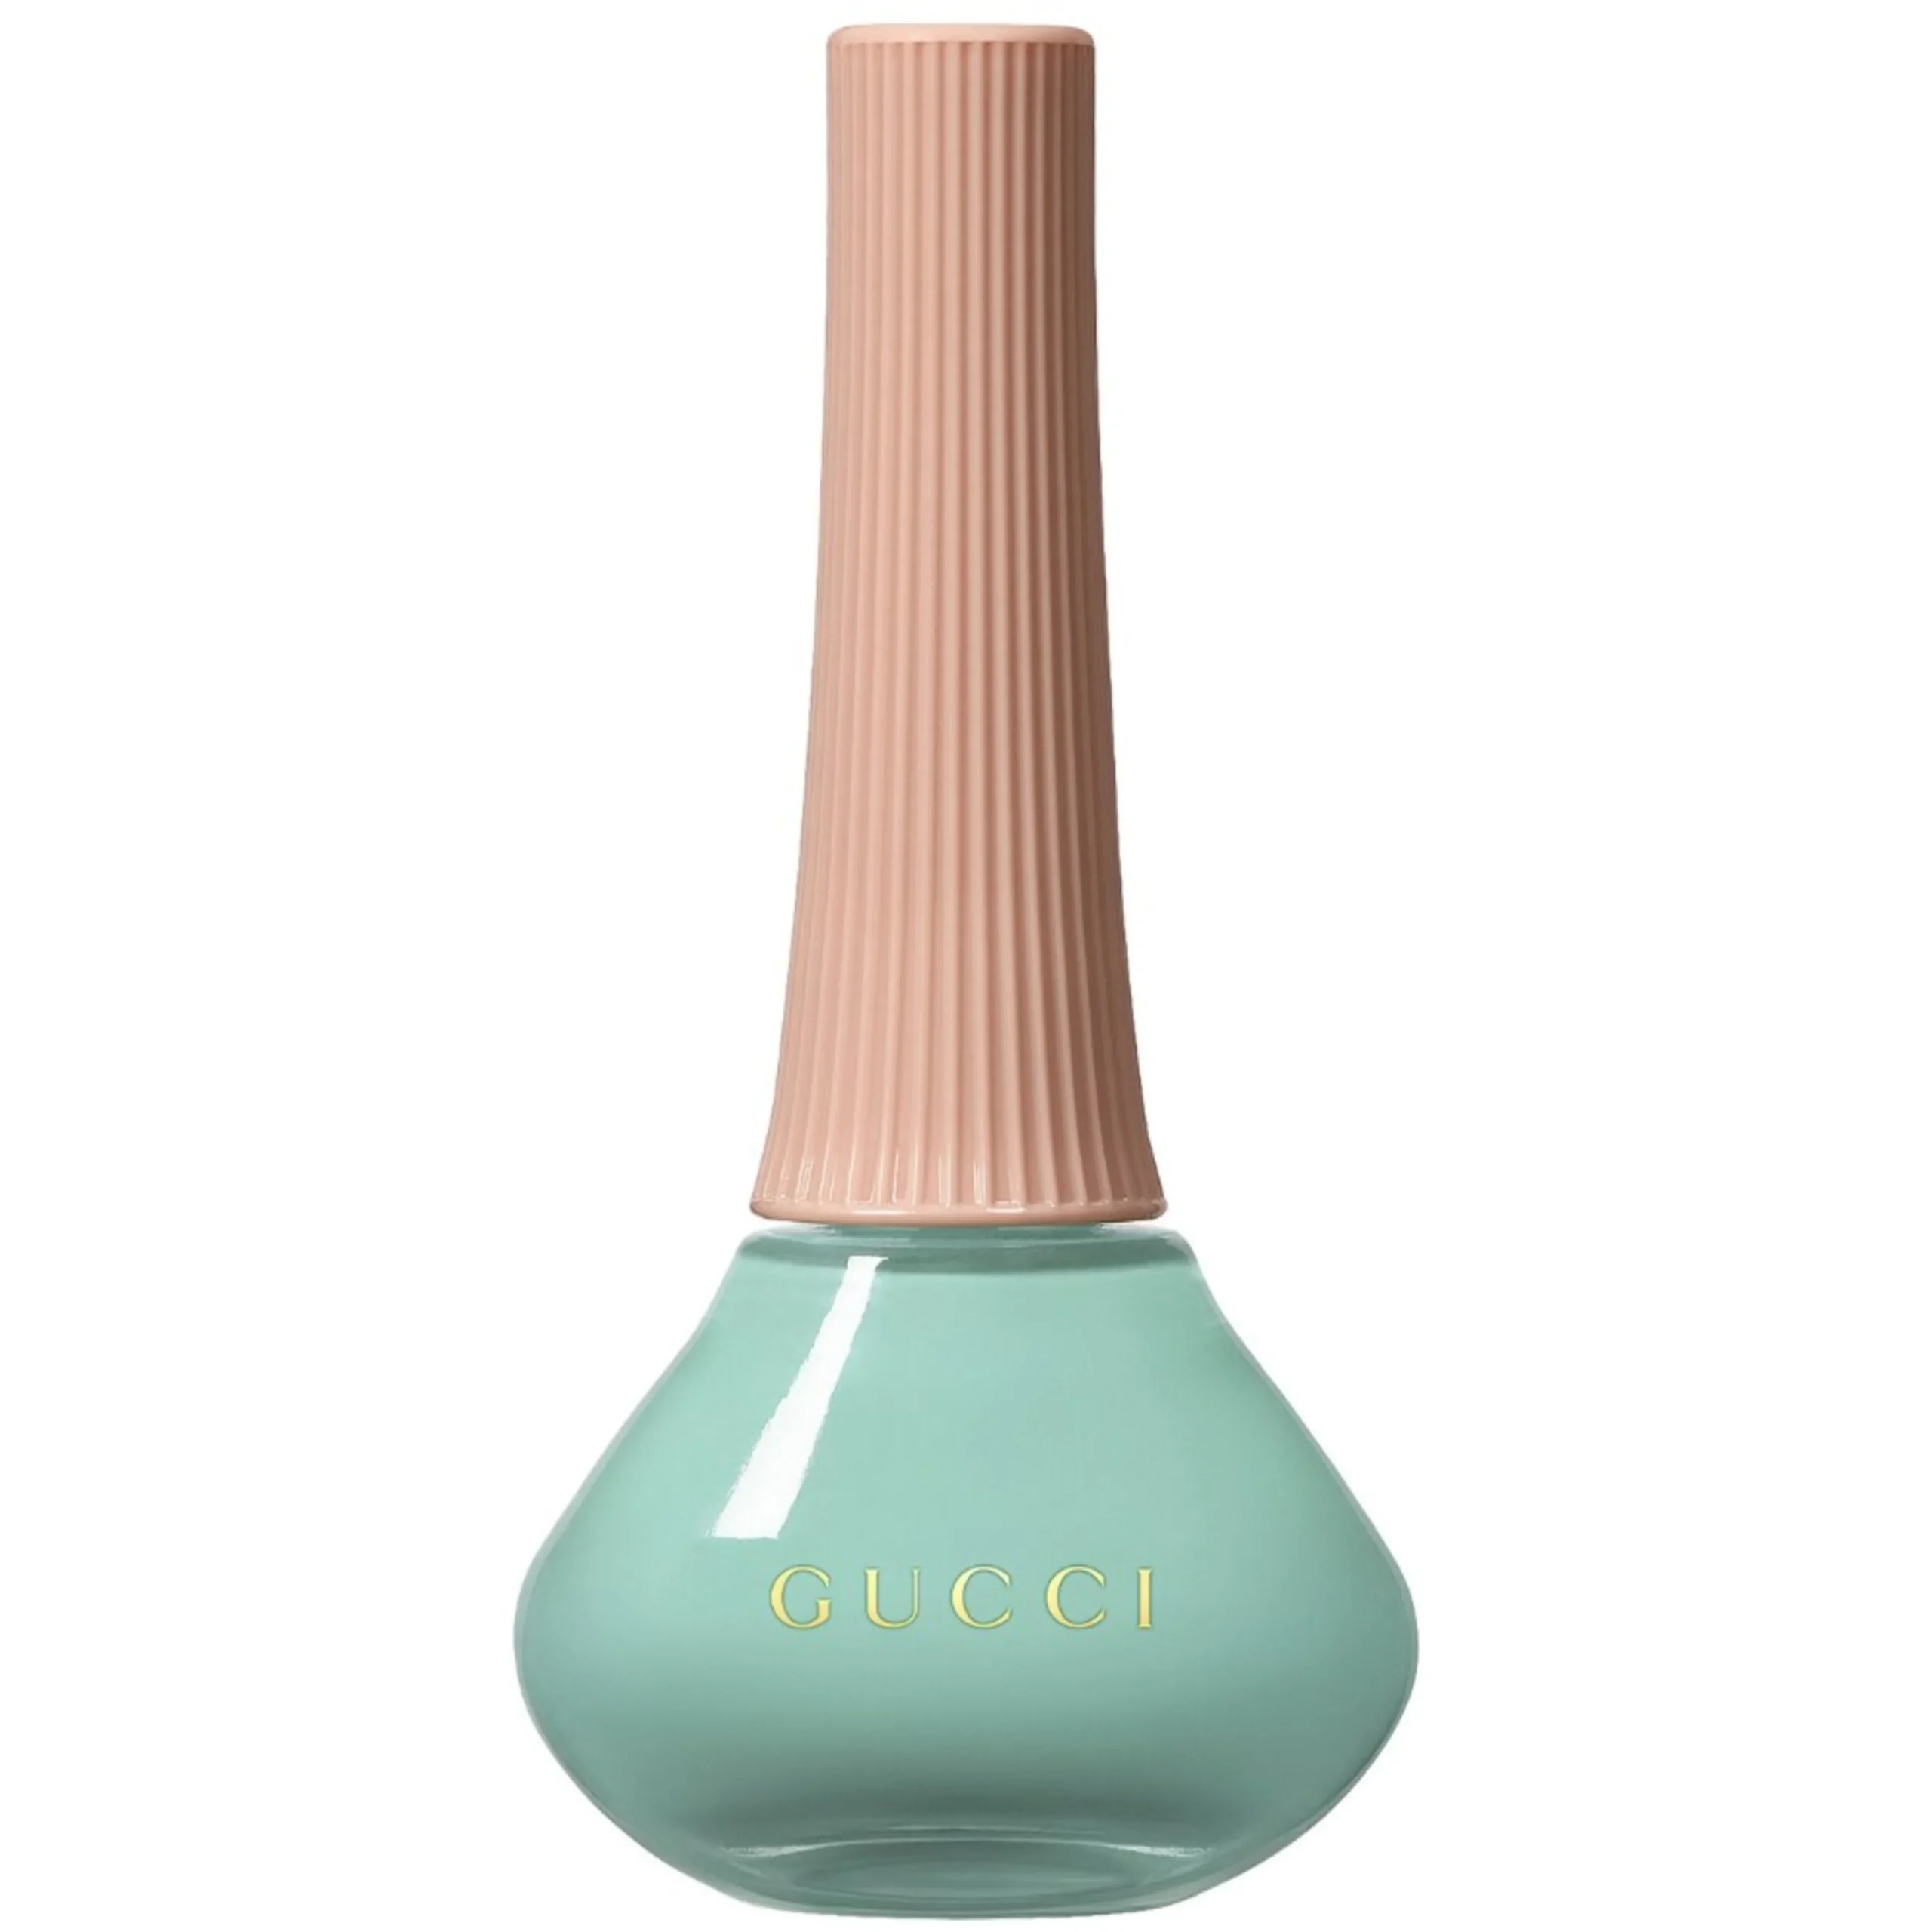 Gucci Glossy Nail Polish in Dorothy Turquoise